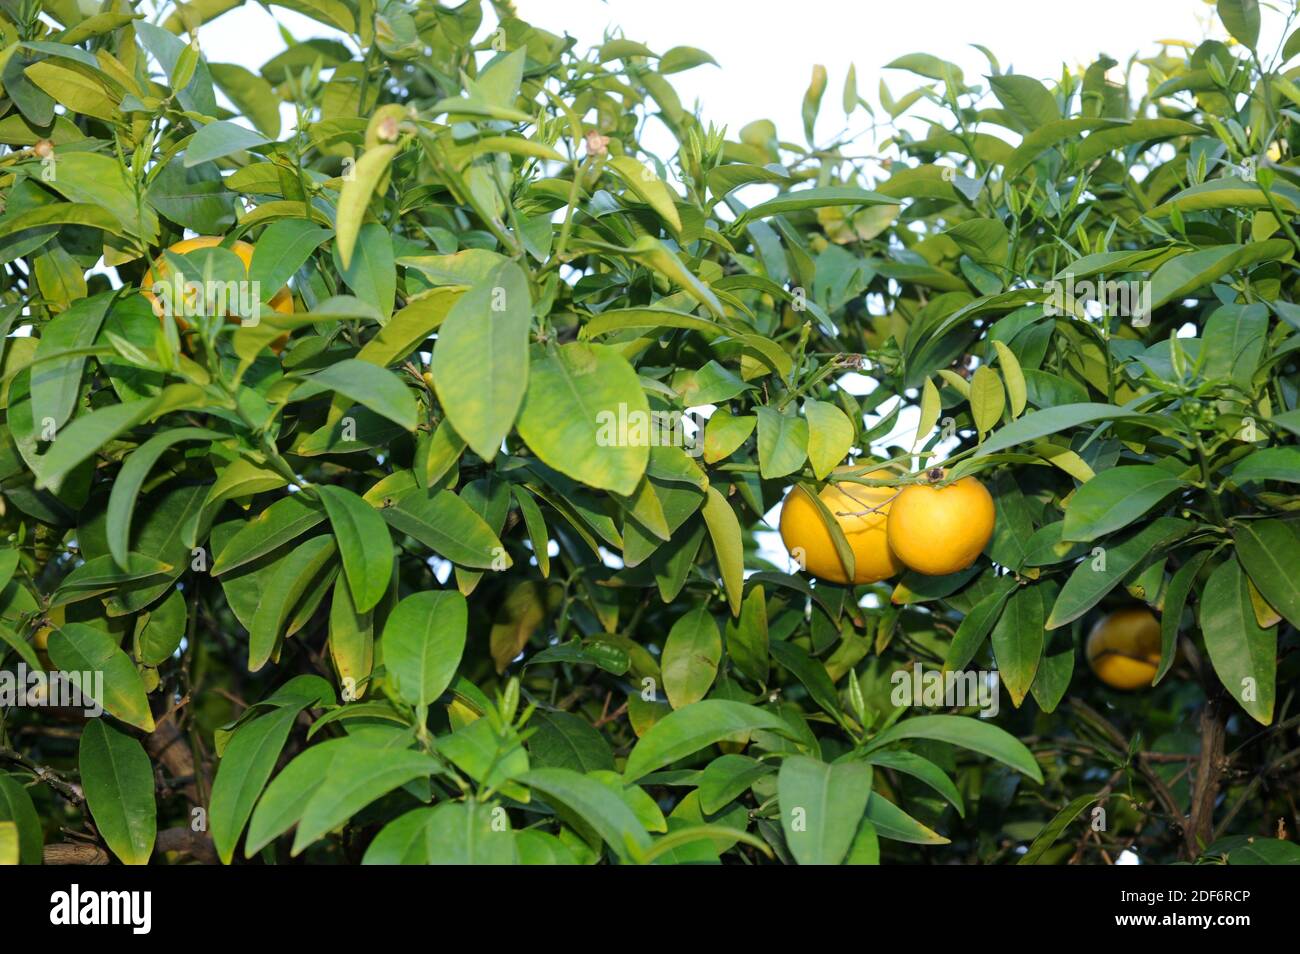 Pomelo (Citrus maxima or Citrus grandis) is a small tree native to south Asia. Its fruits are edible. Stock Photo